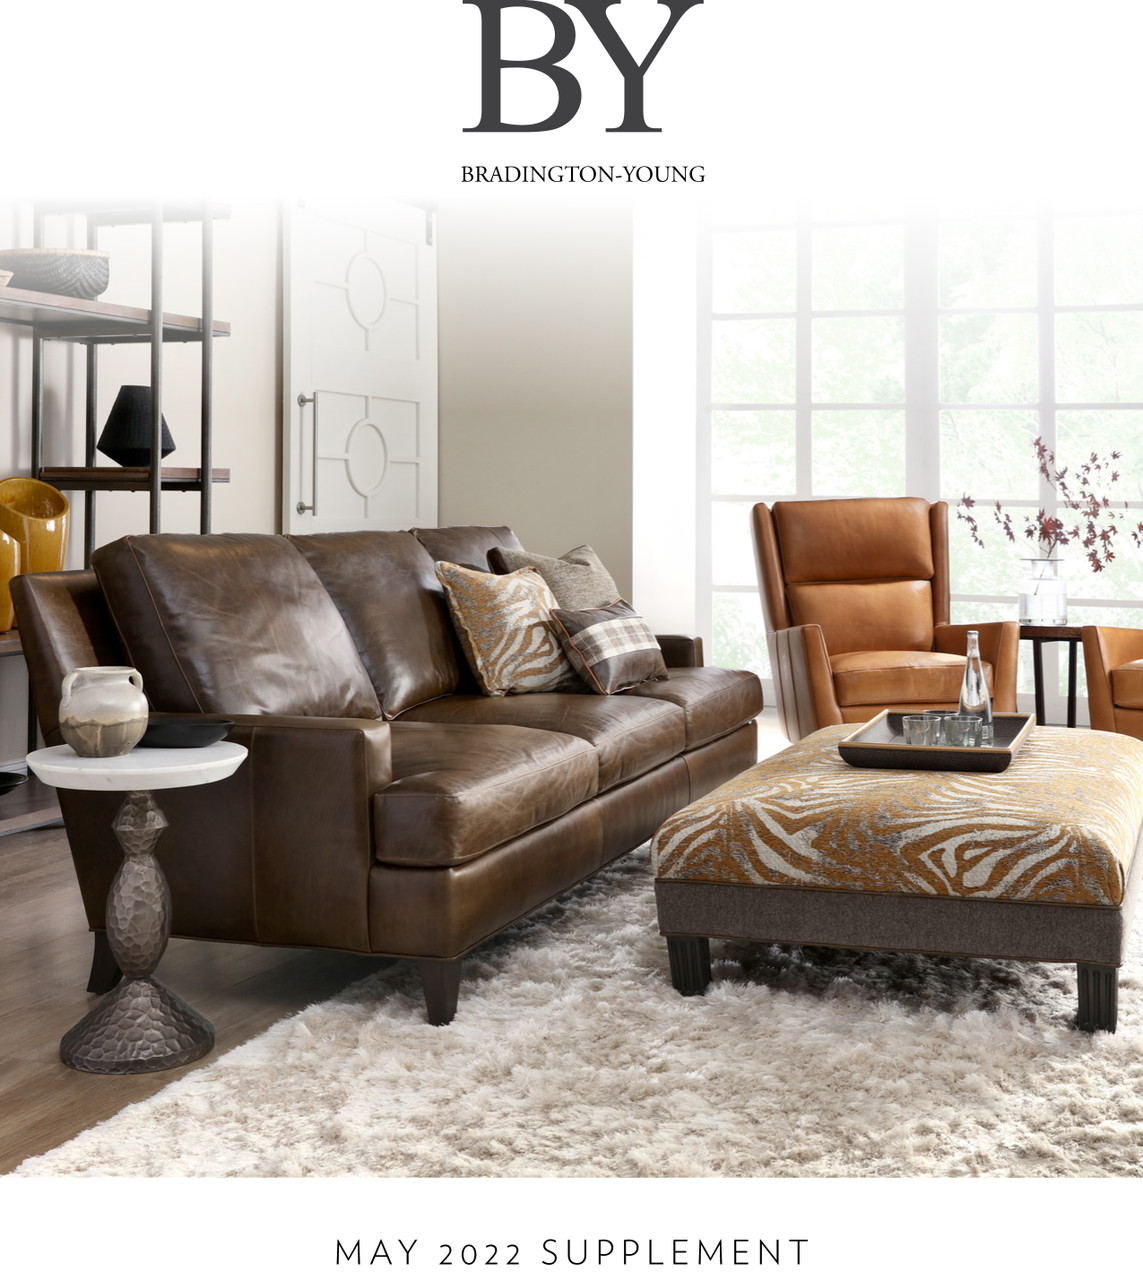 Best throw pillows for leather couch - At Home With The Barkers